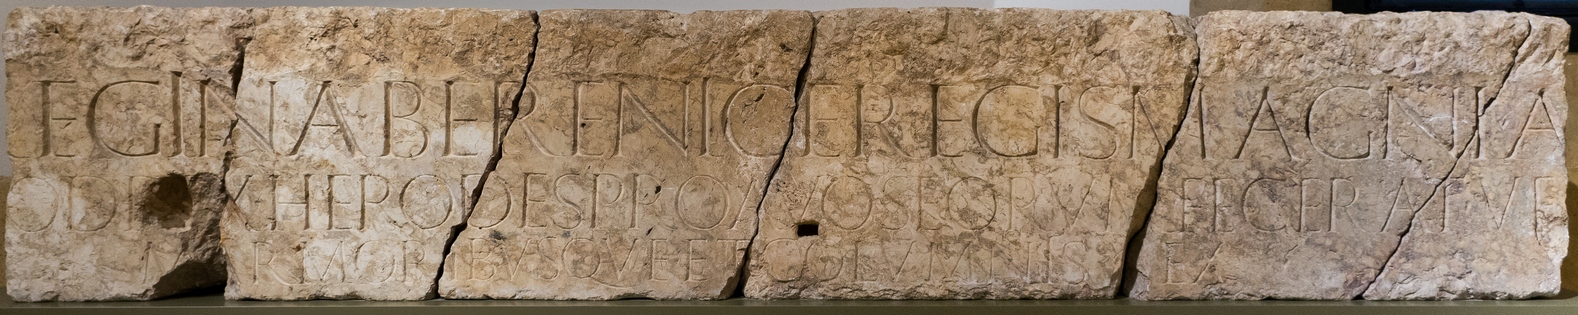 Beirut, Inscription mentioning Queen Berenice and King Agrippa II